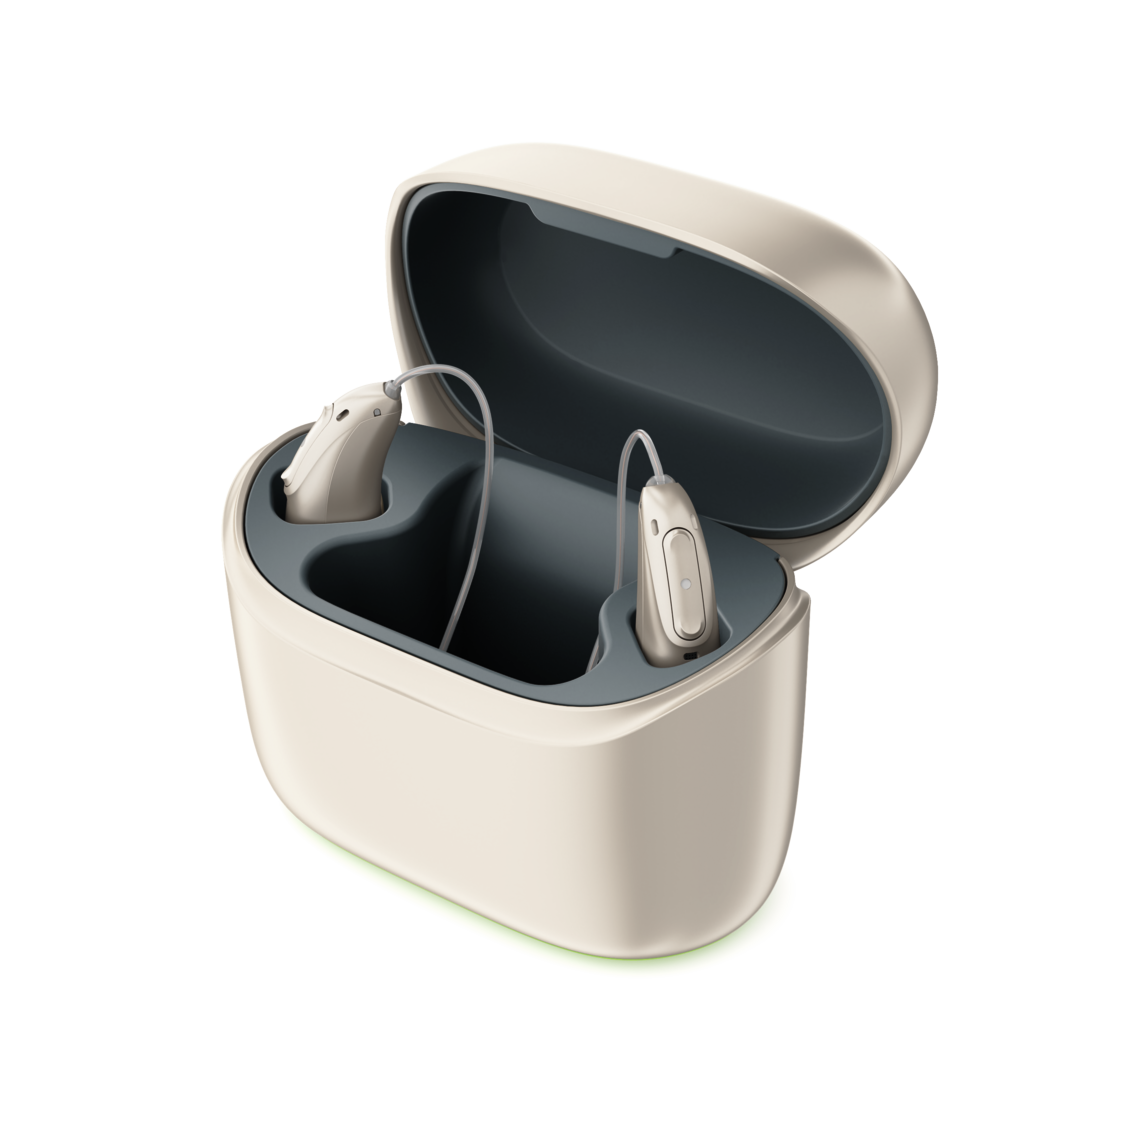 Phonak hearing aid charger.